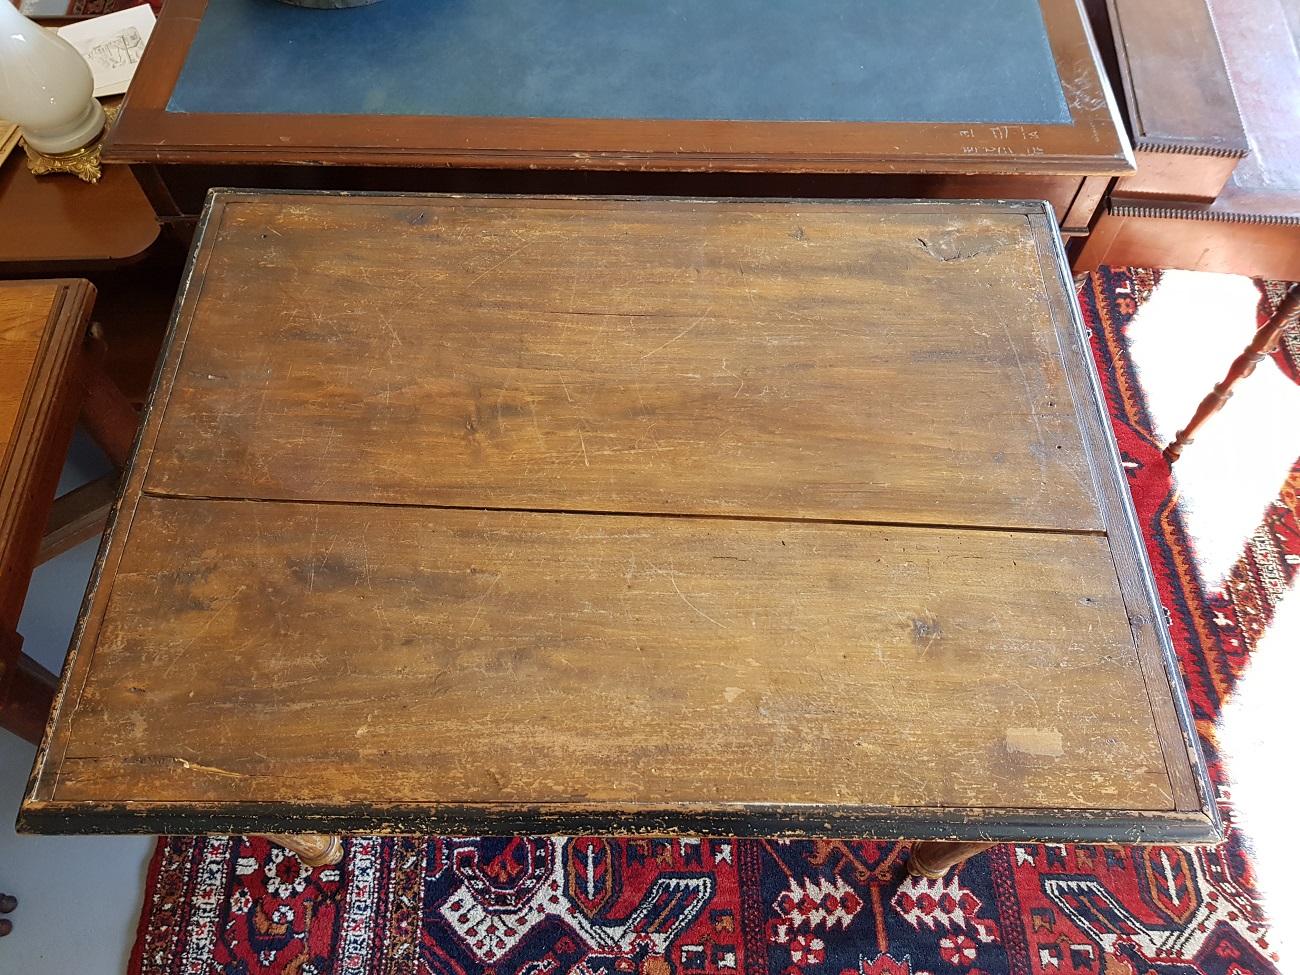 Lovely and distressed Old French farmers pine wood kitchen table with drawer and carved legs, late 19th century.

The measurements are,
Depth 80 cm/ 31.4 inch.
Width 111 cm/ 43.7 inch.
Height 75 cm/ 29.5 inch.
      